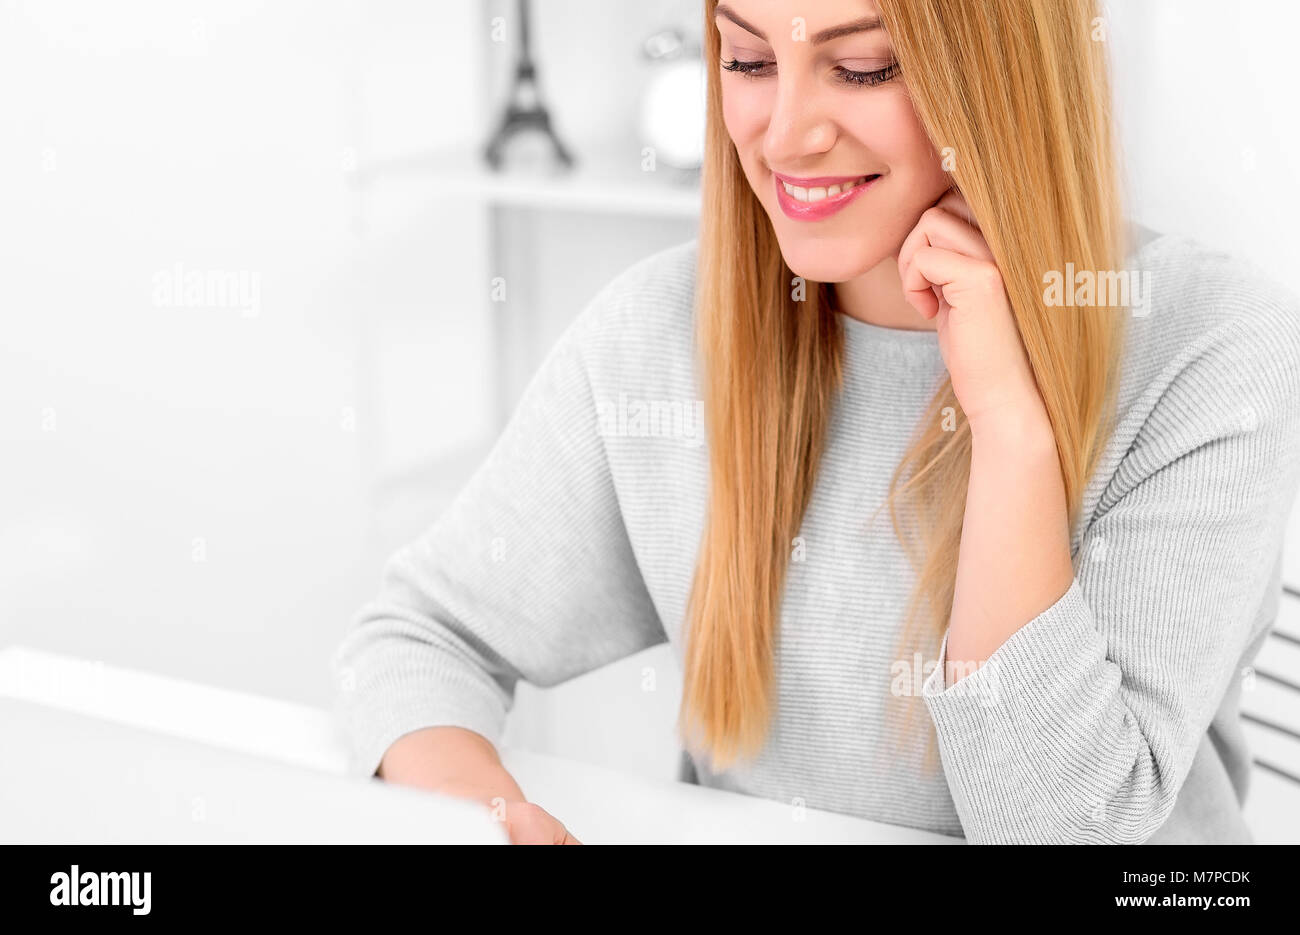 Young woman is working at a computer or laptop in a good mood. Blonde at her desk at home or in the office with a laptop and a red cup. Stock Photo